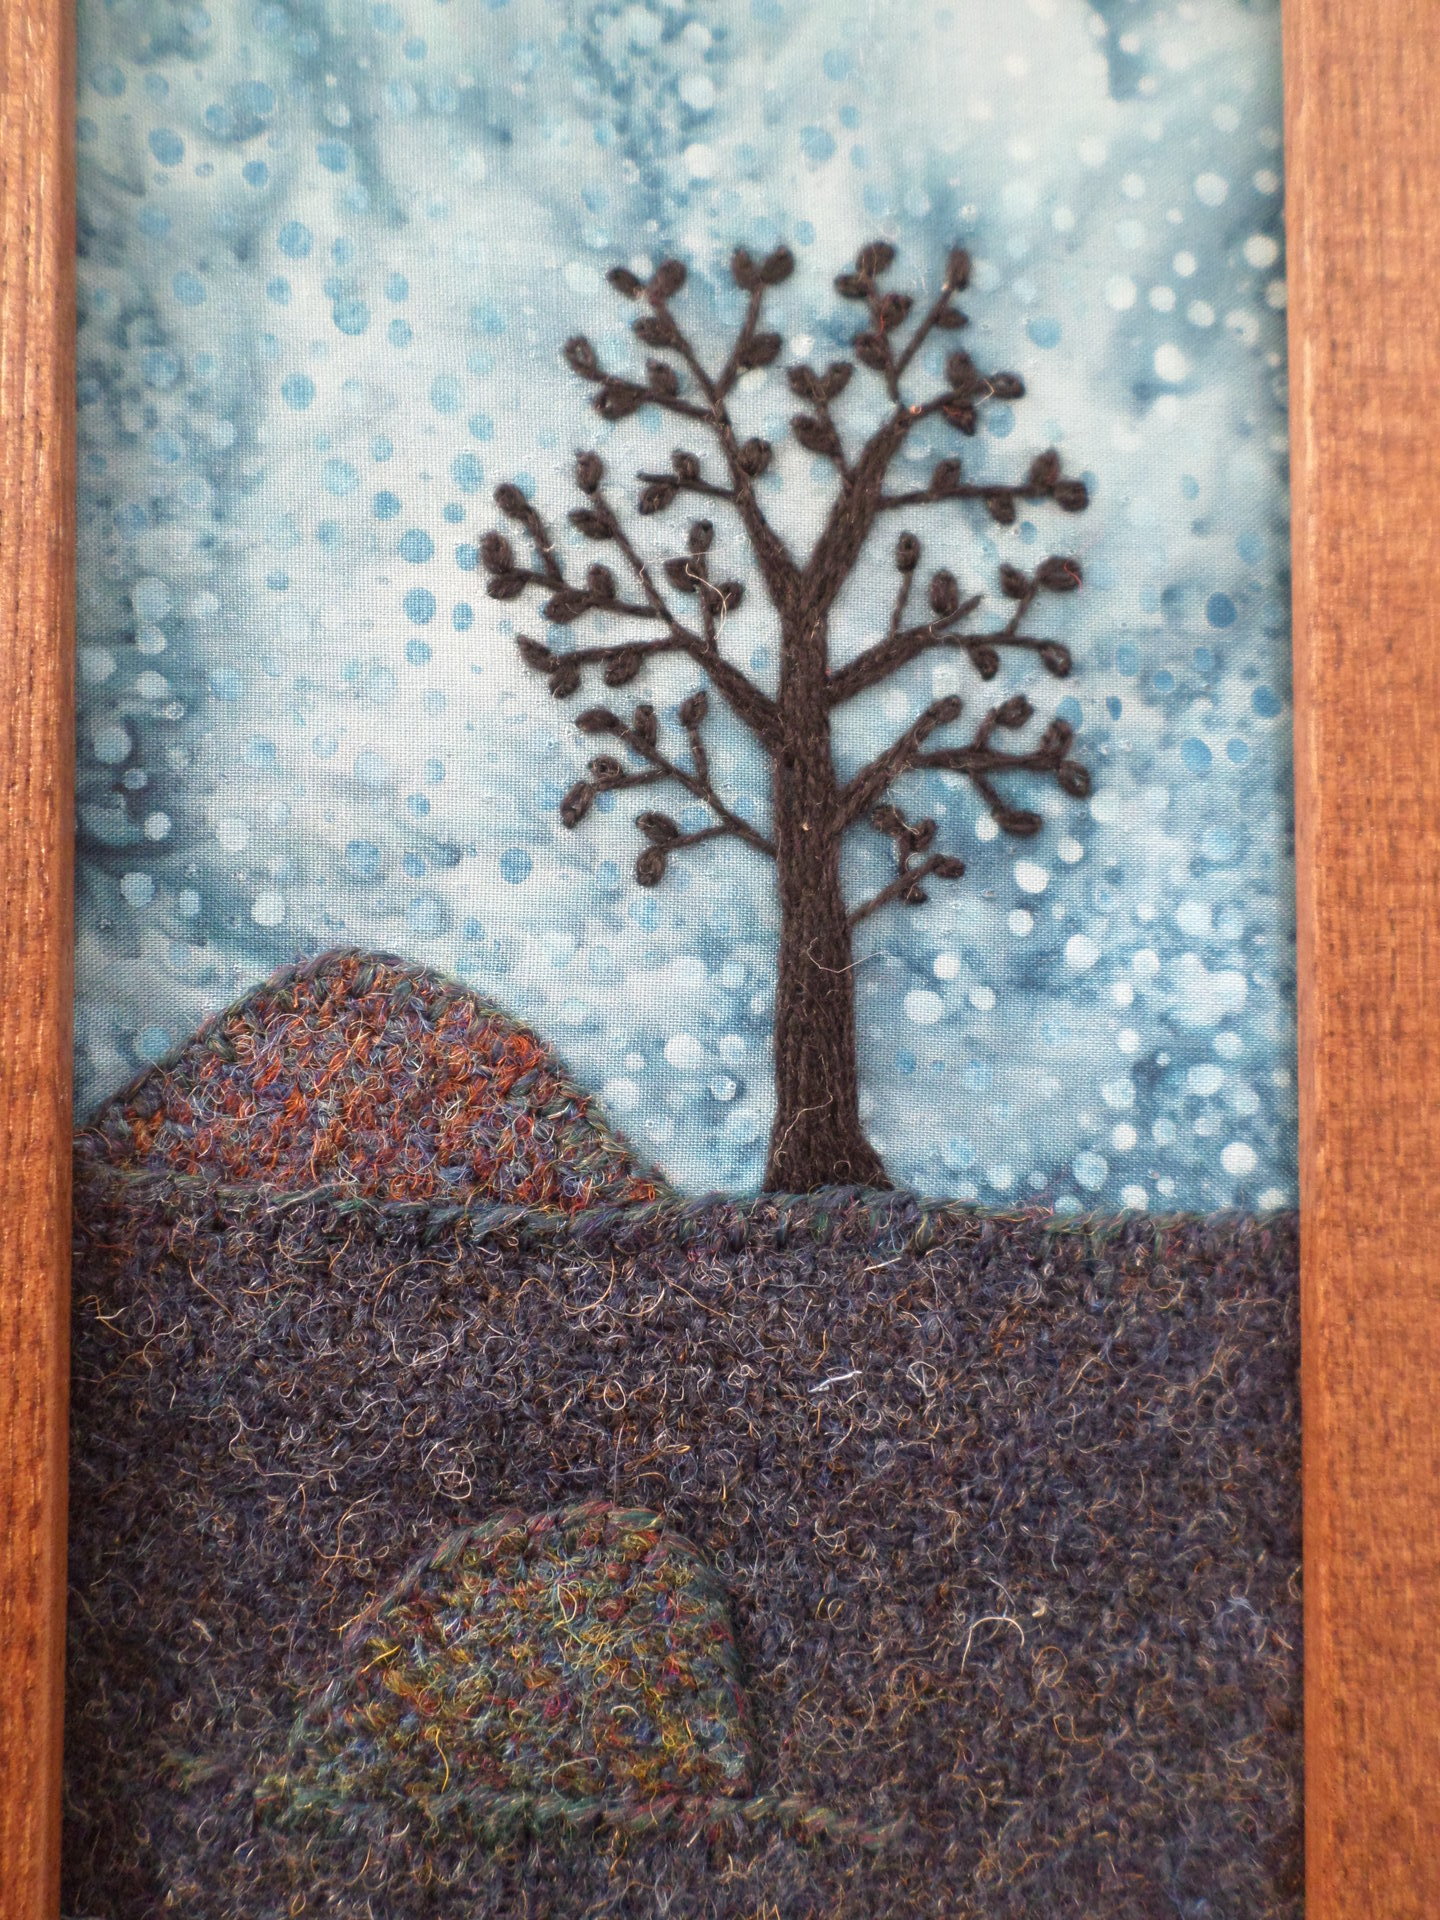 Downeast Night Hand-Embroidered Crewel Wall Art